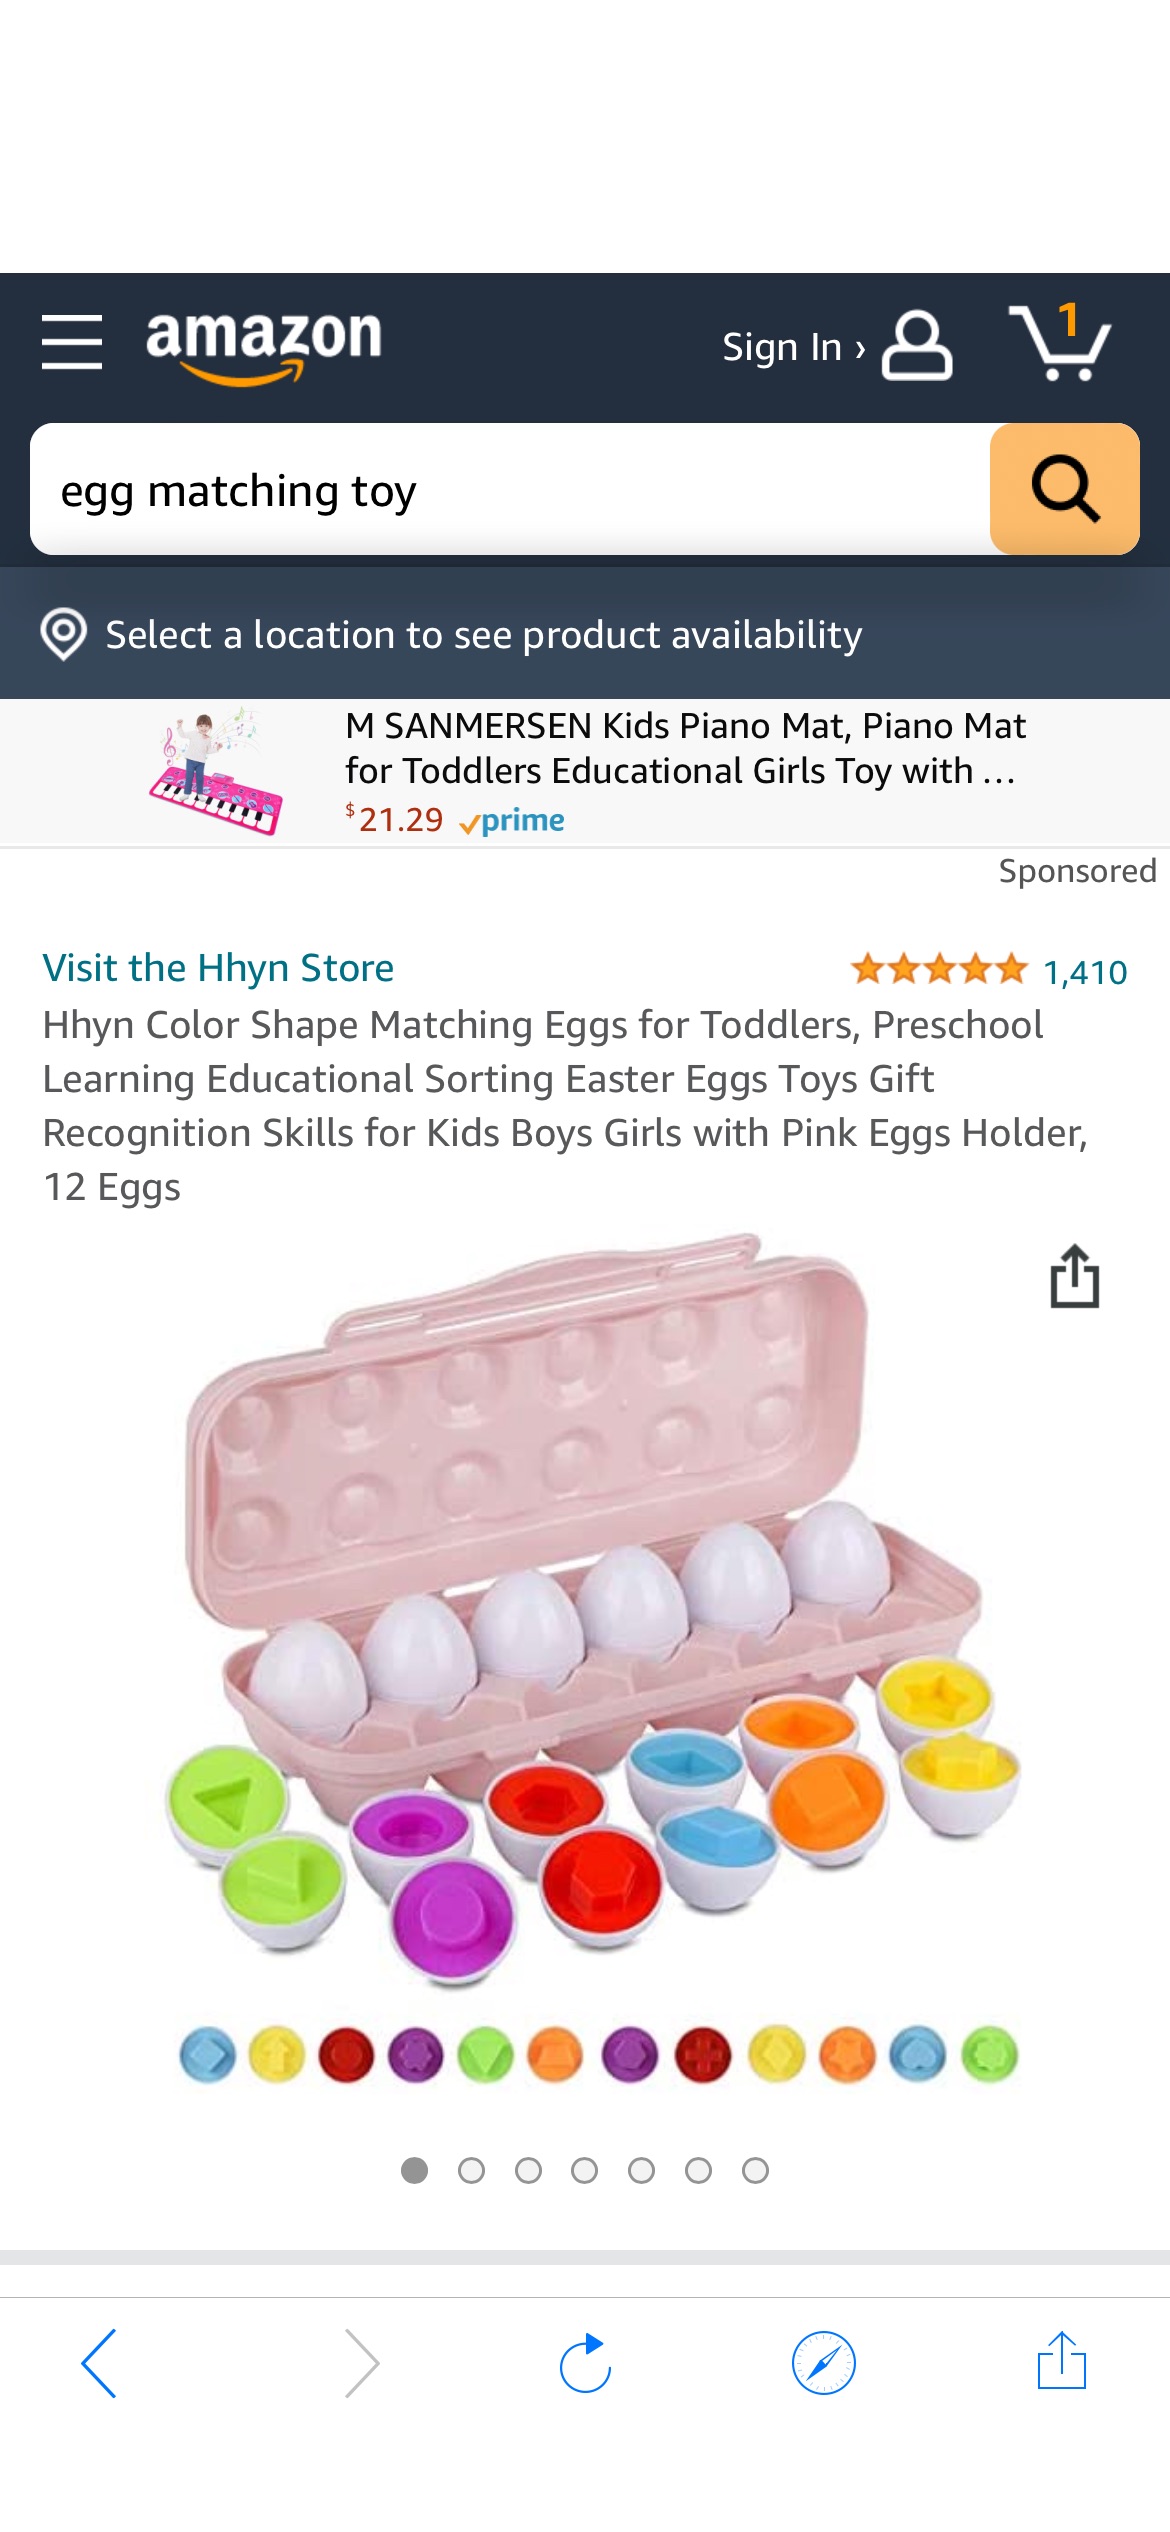 Amazon.com: Hhyn Color Shape Matching Eggs for Toddlers, Preschool Learning Educational Sorting Easter Eggs Toys Gift Recognition Skills 鸡蛋形状配对玩具